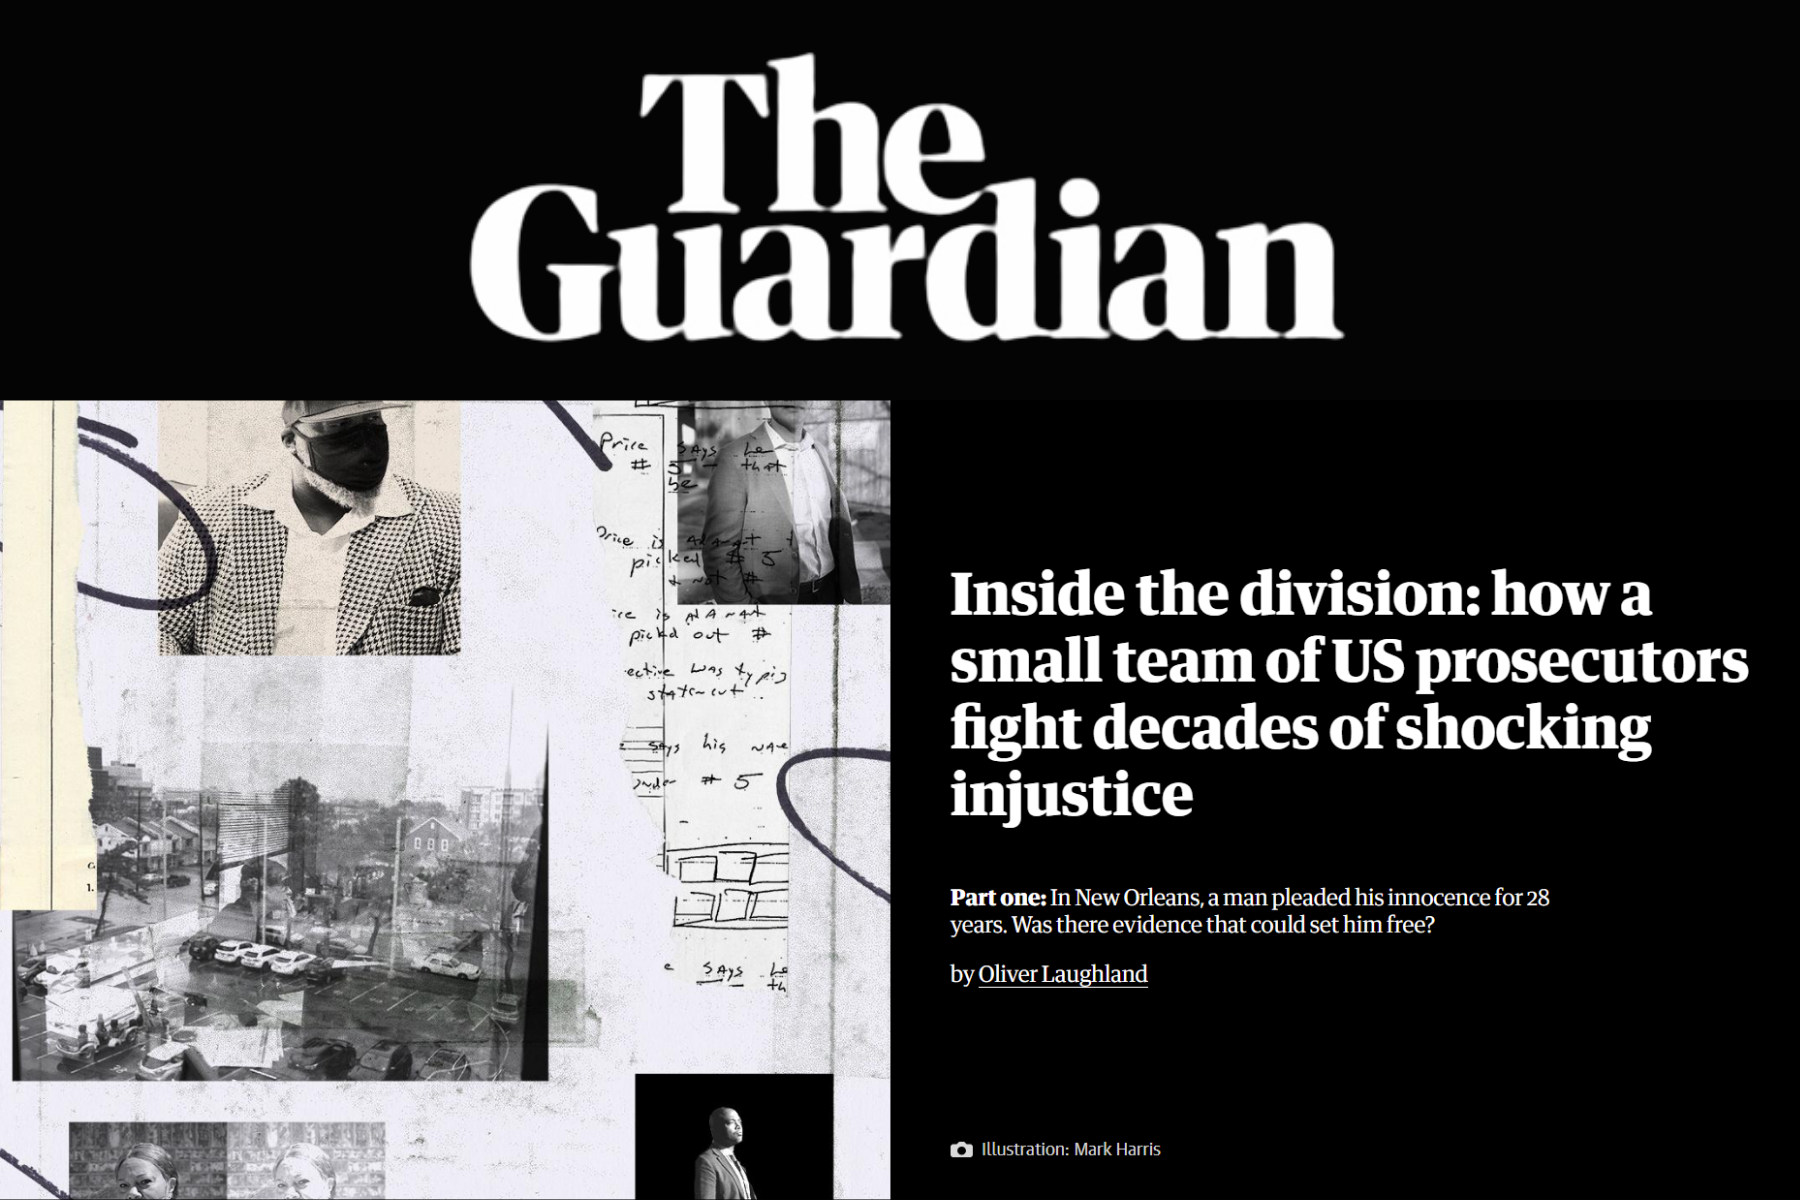 The Guardian - Inside the Division: How a Small Team of US prosecutors Fight Decades of Shocking Injustice